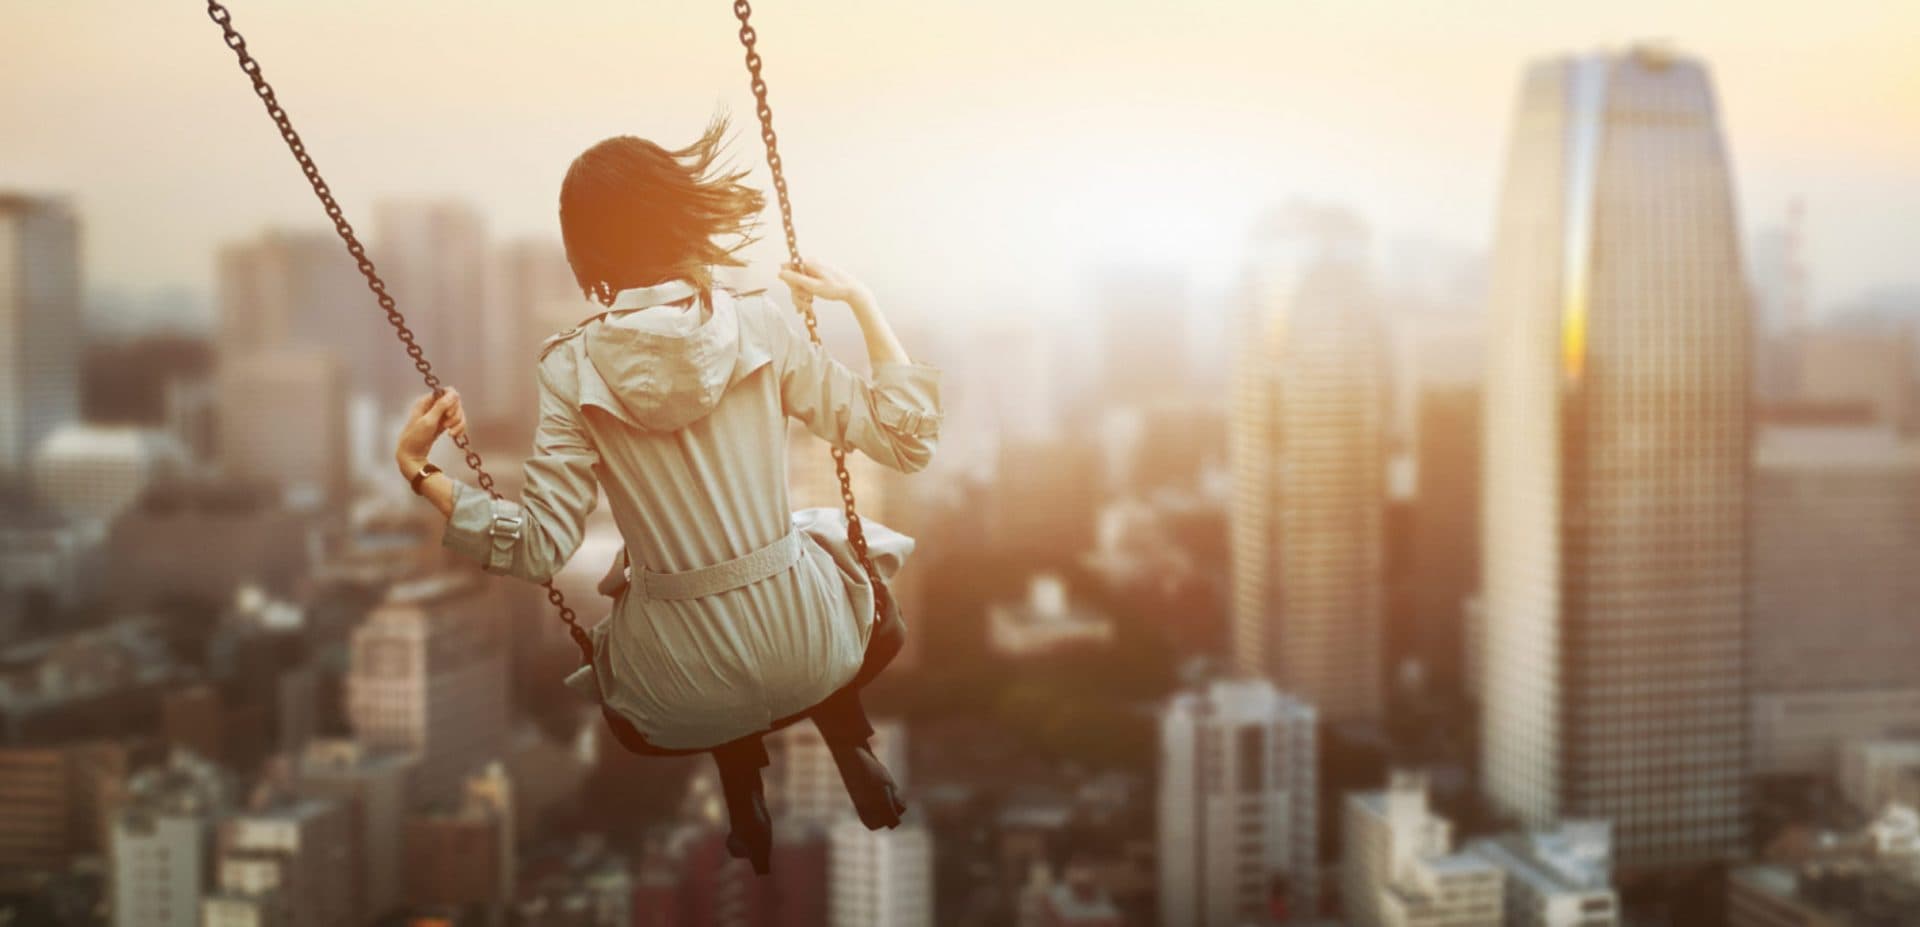 Person on swing above buildings